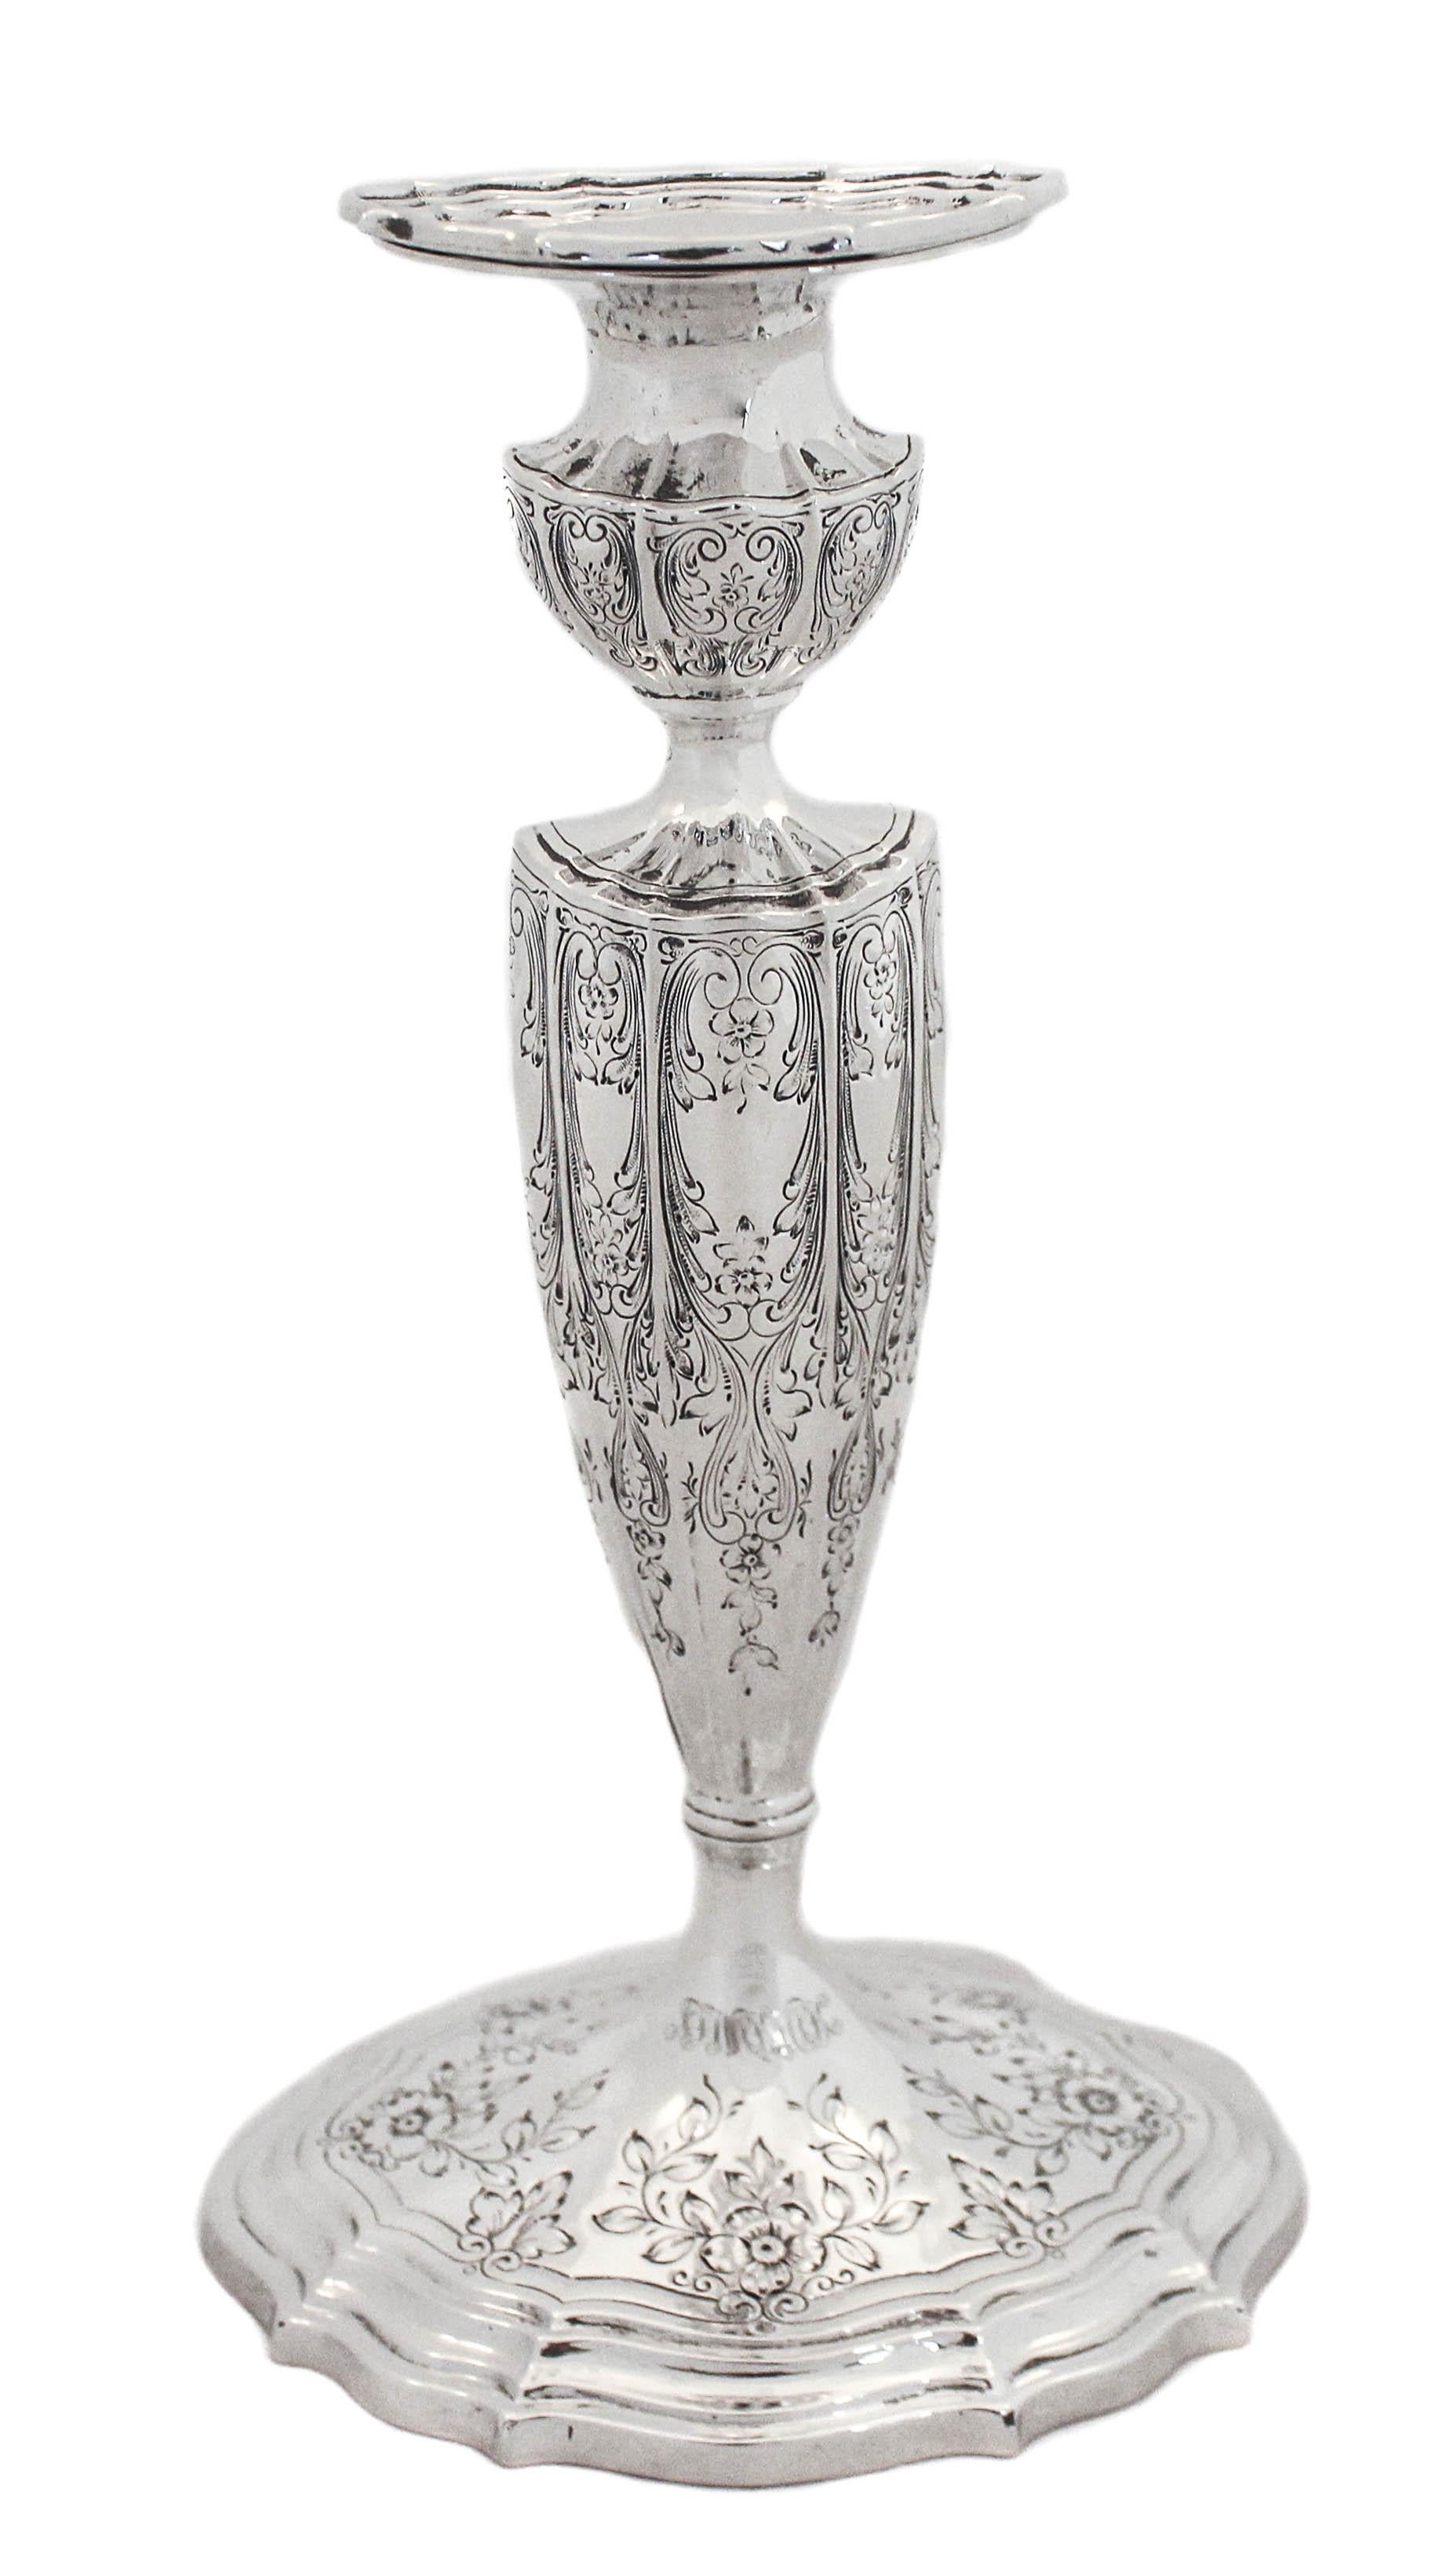 We are delighted to offer you this pair of sterling silver candlesticks by William Durgin Silver. If you appreciate delicate old-world work, these candlesticks are for you!! Beautifully crafted and etched with flowers, leaves and garlands around the